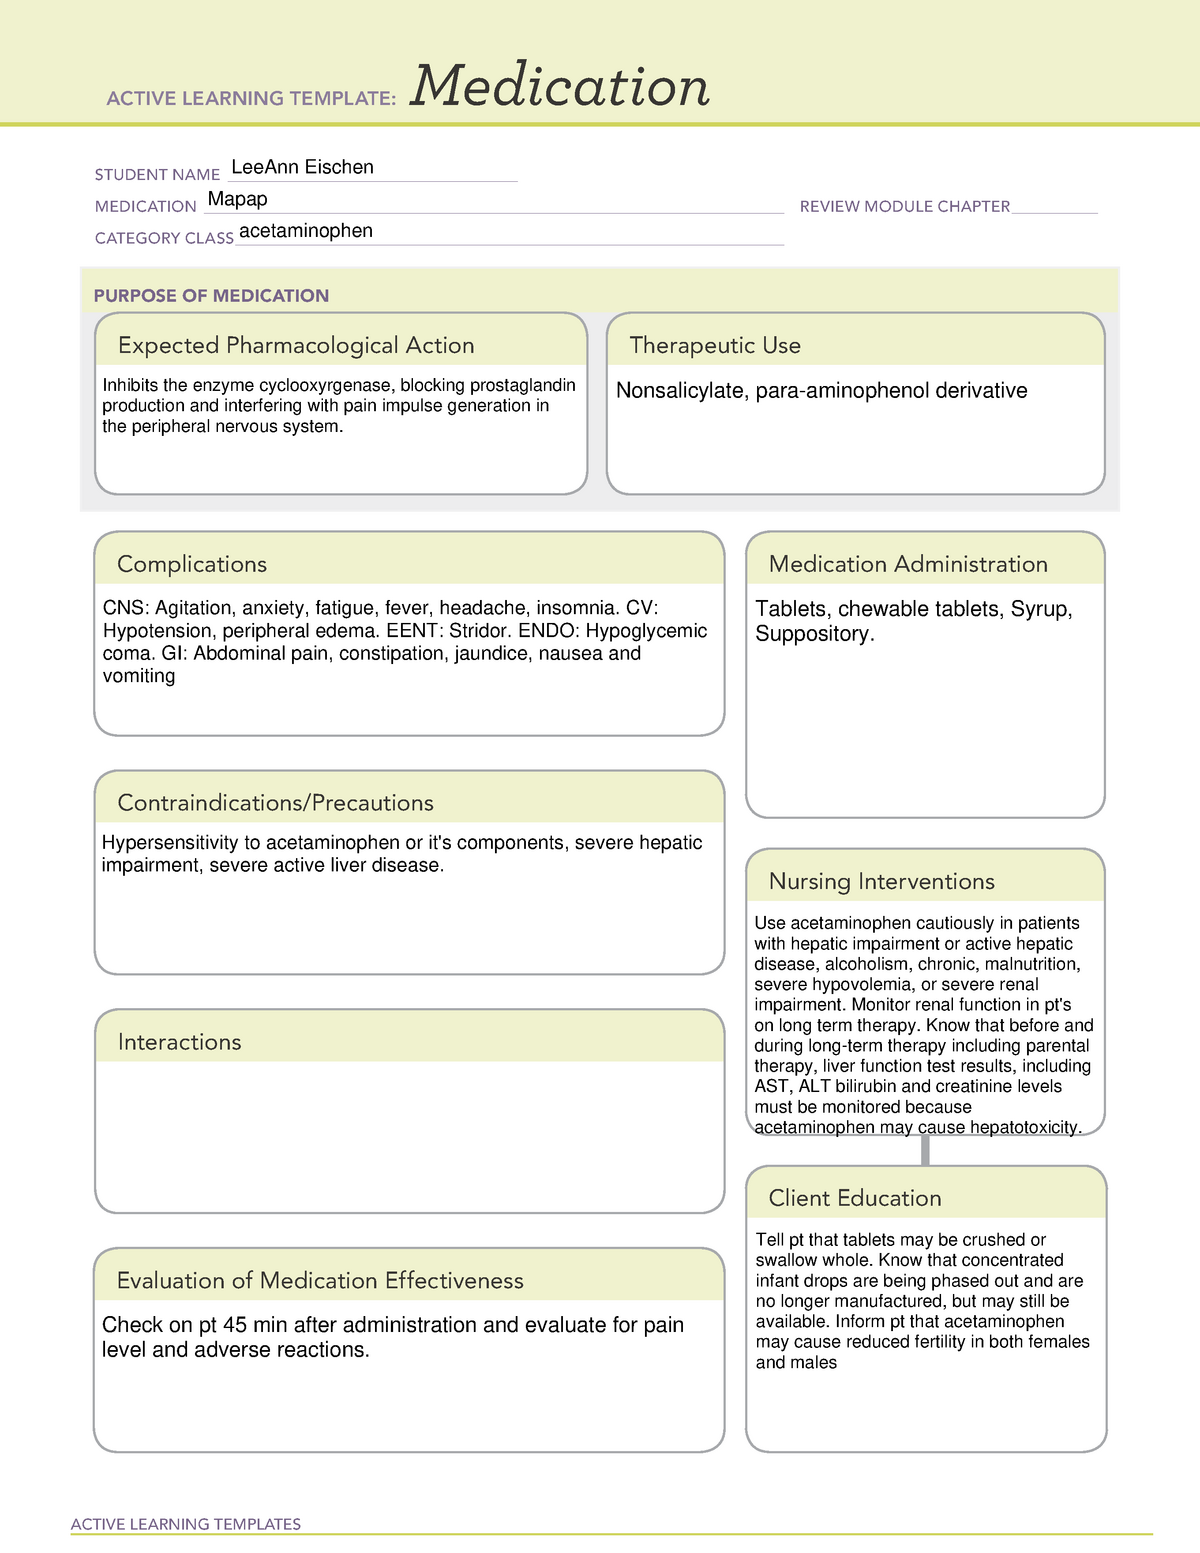 acetaminophen-medication-template-active-learning-templates-medication-student-name-studocu